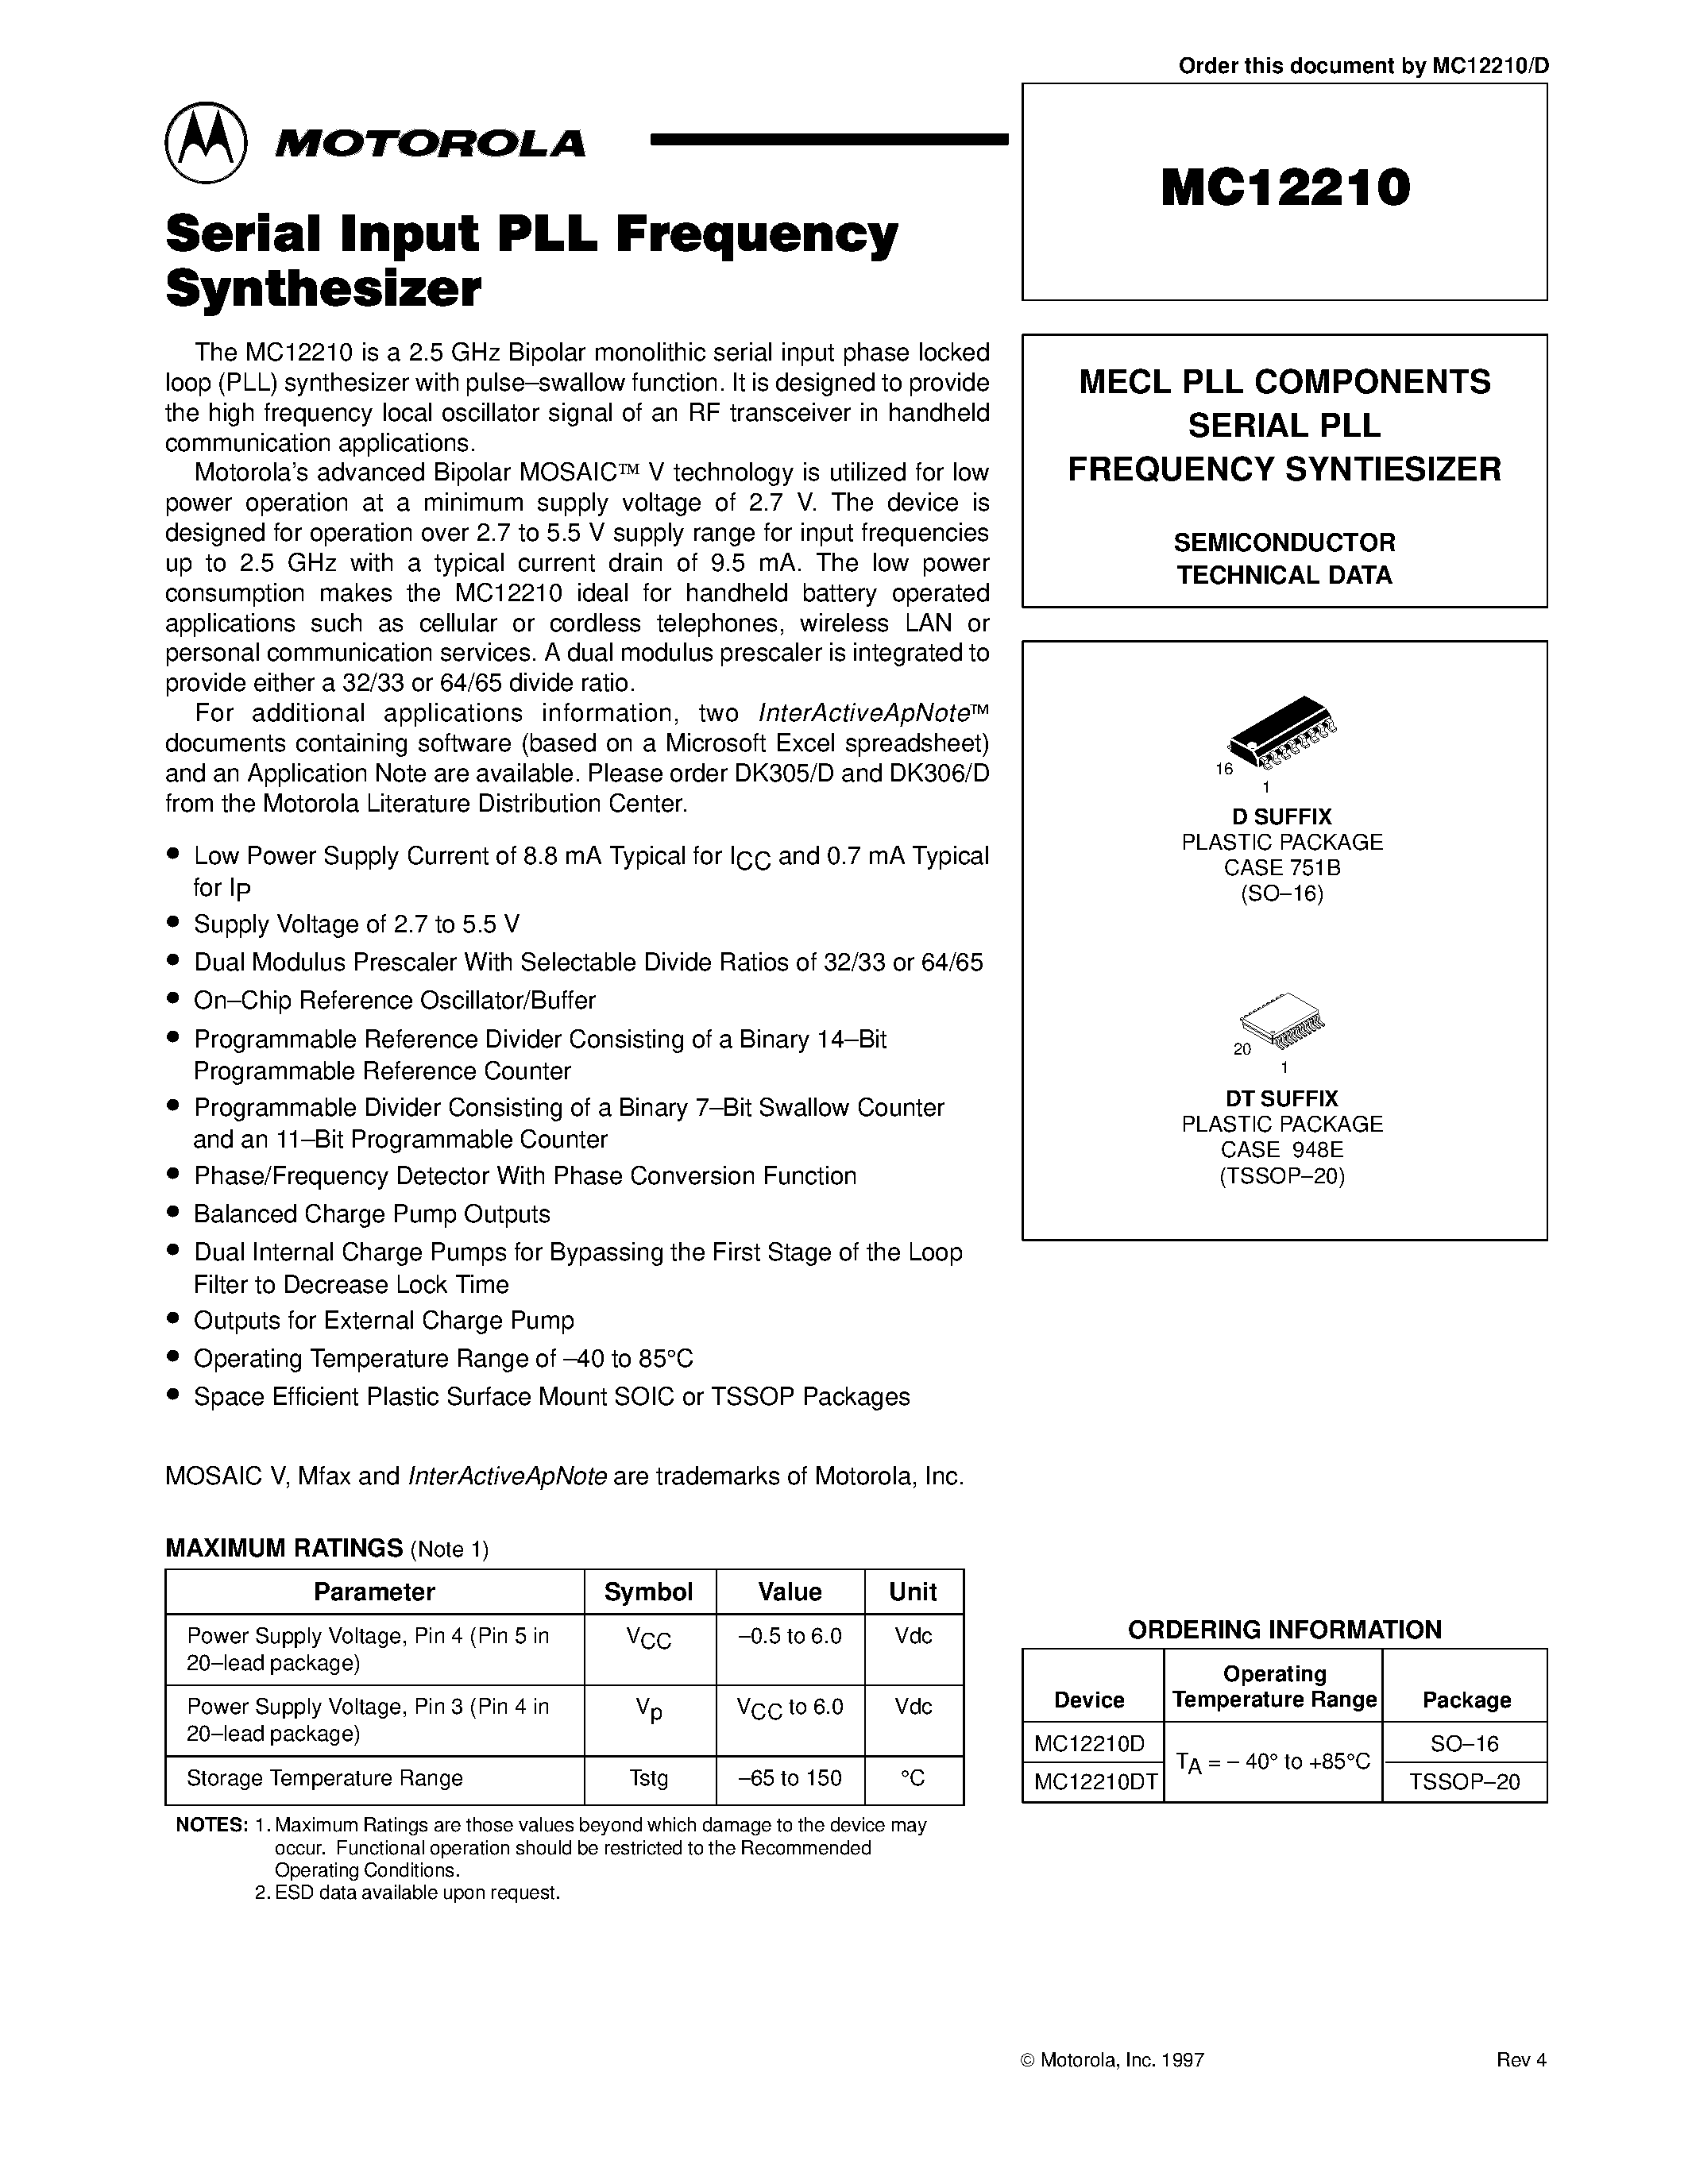 Datasheet MC12210D - MECL PLL COMPONENTS SERIAL PLL FREQUENCY SYNTIESIZER page 1